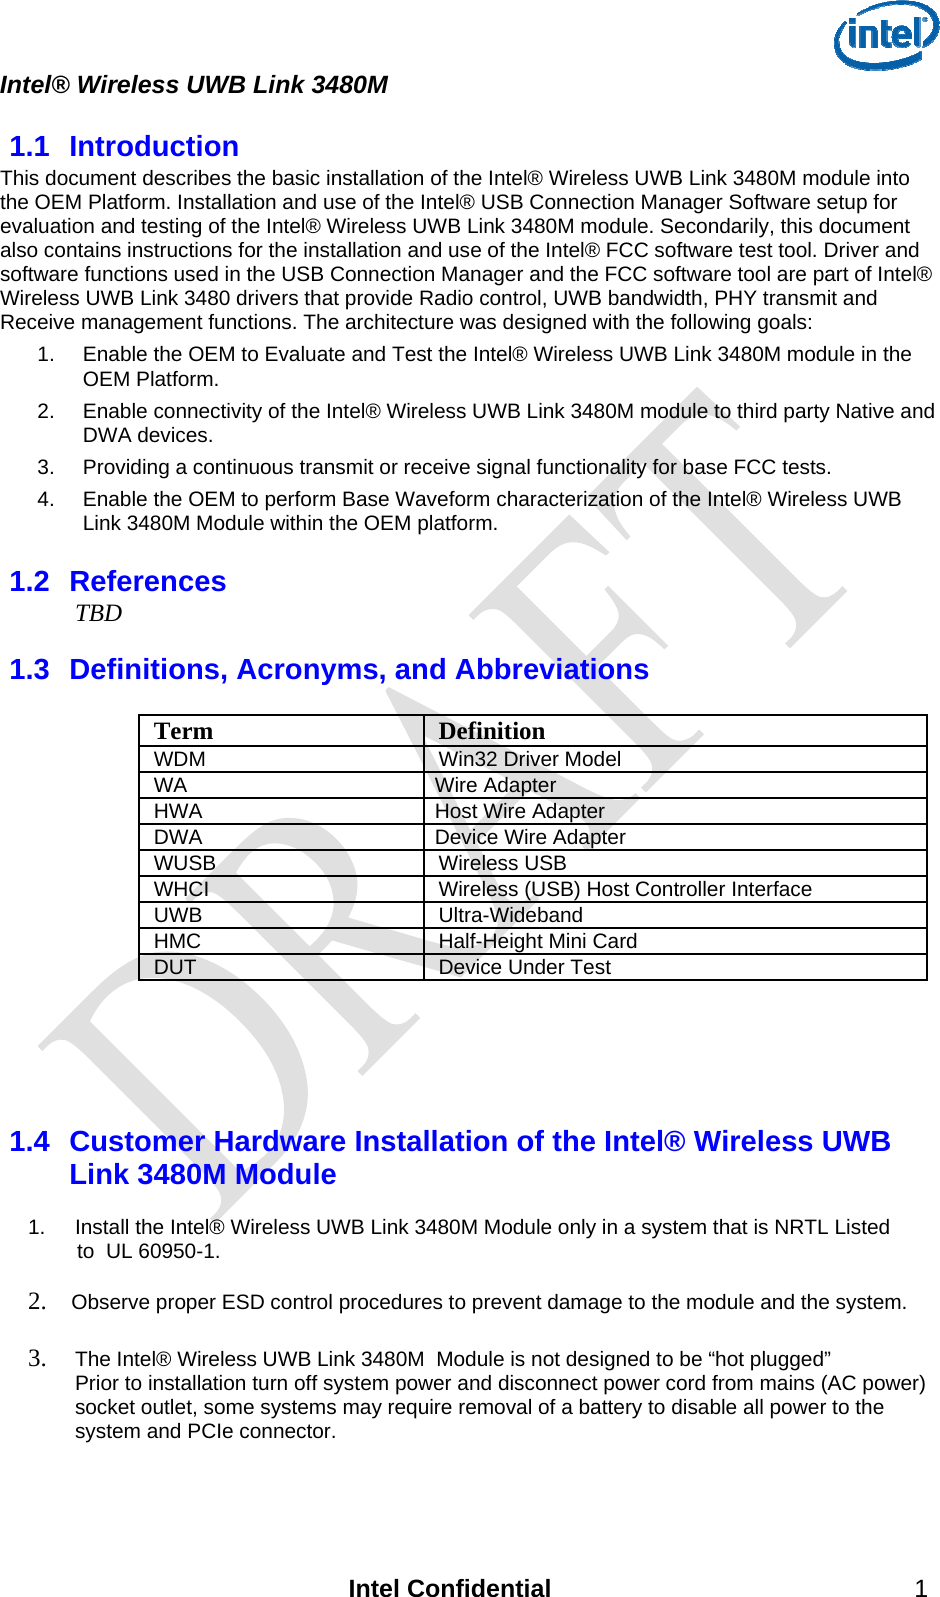  Intel® Wireless UWB Link 3480M   1.1  Introduction This document describes the basic installation of the Intel® Wireless UWB Link 3480M module into the OEM Platform. Installation and use of the Intel® USB Connection Manager Software setup for evaluation and testing of the Intel® Wireless UWB Link 3480M module. Secondarily, this document also contains instructions for the installation and use of the Intel® FCC software test tool. Driver and software functions used in the USB Connection Manager and the FCC software tool are part of Intel® Wireless UWB Link 3480 drivers that provide Radio control, UWB bandwidth, PHY transmit and Receive management functions. The architecture was designed with the following goals: 1.  Enable the OEM to Evaluate and Test the Intel® Wireless UWB Link 3480M module in the OEM Platform. 2.  Enable connectivity of the Intel® Wireless UWB Link 3480M module to third party Native and DWA devices.  3.  Providing a continuous transmit or receive signal functionality for base FCC tests. 4.  Enable the OEM to perform Base Waveform characterization of the Intel® Wireless UWB Link 3480M Module within the OEM platform. 1.2  References  TBD  1.3  Definitions, Acronyms, and Abbreviations   Term Definition WDM   Win32 Driver Model WA Wire Adapter HWA  Host Wire Adapter DWA   Device Wire Adapter WUSB Wireless USB WHCI  Wireless (USB) Host Controller Interface UWB Ultra-Wideband HMC  Half-Height Mini Card DUT  Device Under Test    1.4  Customer Hardware Installation of the Intel® Wireless UWB Link 3480M Module    1.  Install the Intel® Wireless UWB Link 3480M Module only in a system that is NRTL Listed     to  UL 60950-1.   2.  Observe proper ESD control procedures to prevent damage to the module and the system.   3. The Intel® Wireless UWB Link 3480M  Module is not designed to be “hot plugged” Prior to installation turn off system power and disconnect power cord from mains (AC power) socket outlet, some systems may require removal of a battery to disable all power to the system and PCIe connector.    Intel Confidential 1 